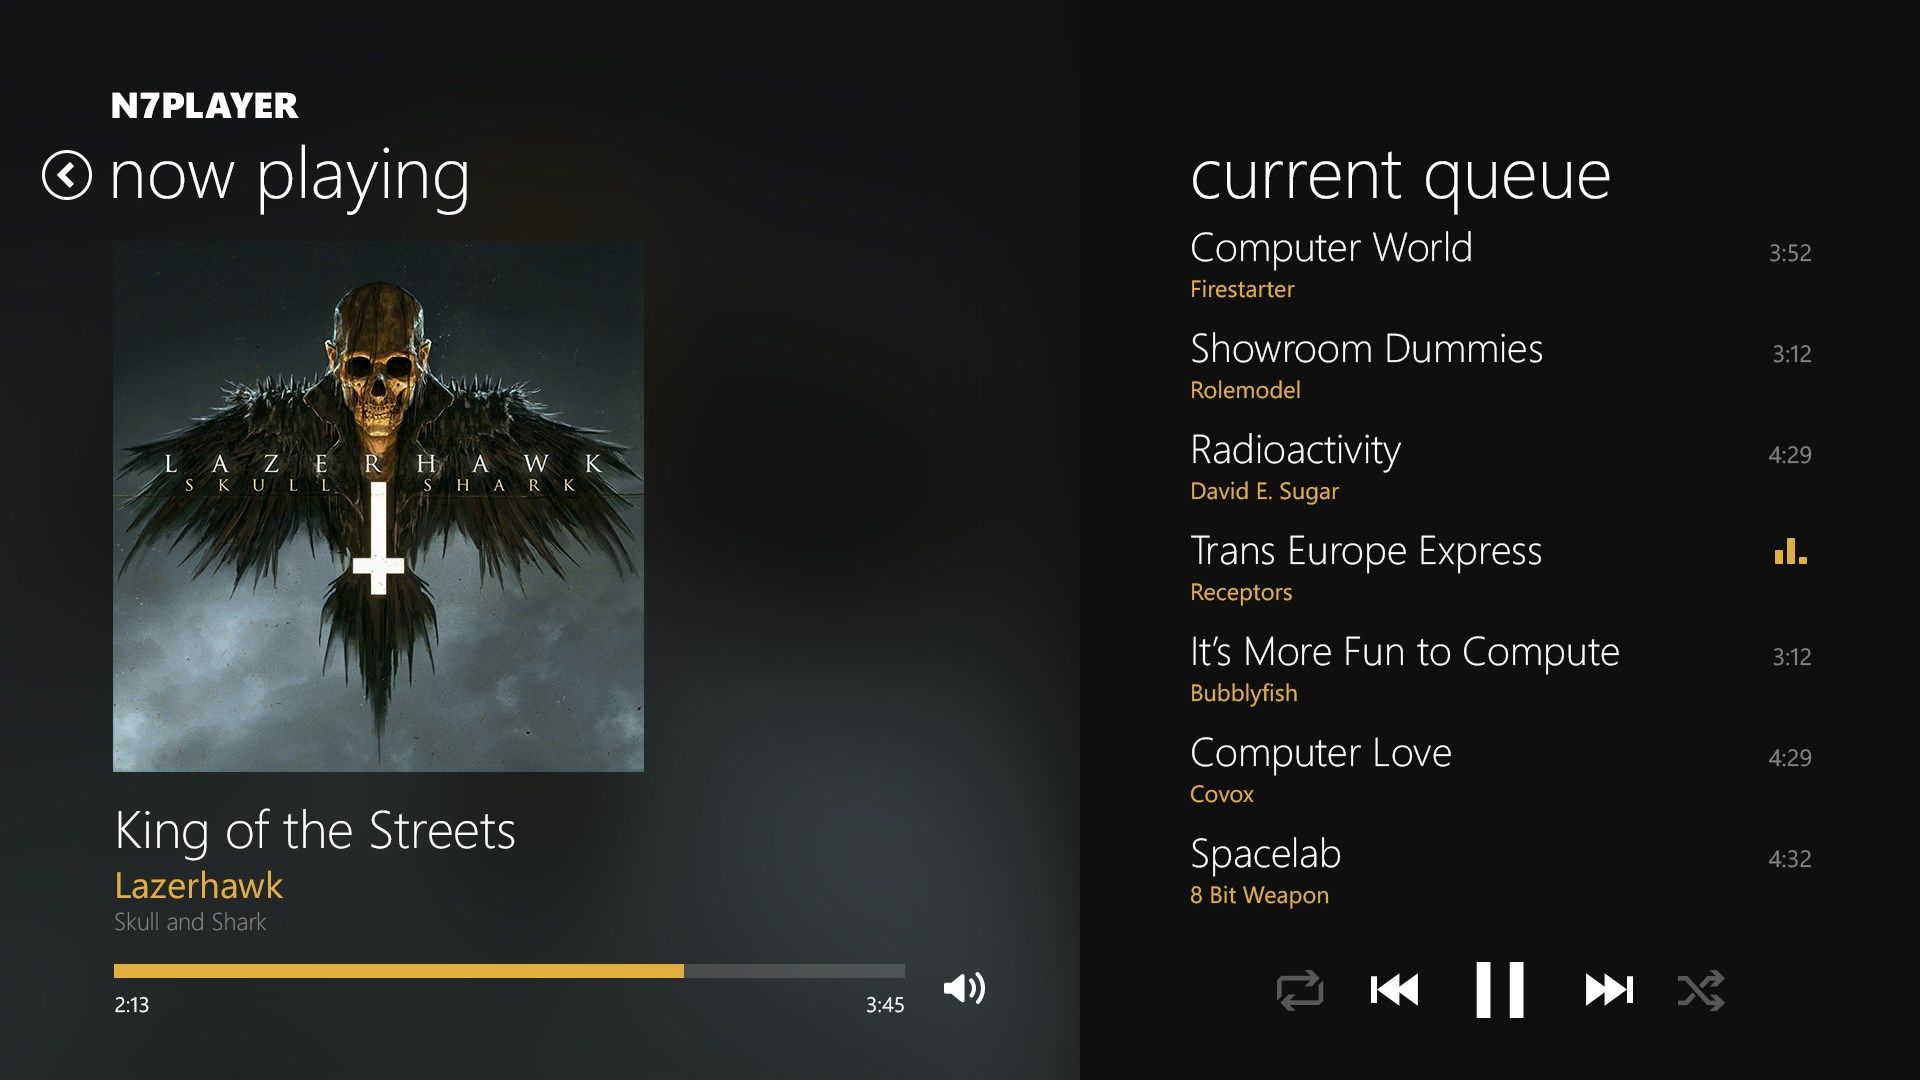 Easy playlist creation - just save your queue as playlist